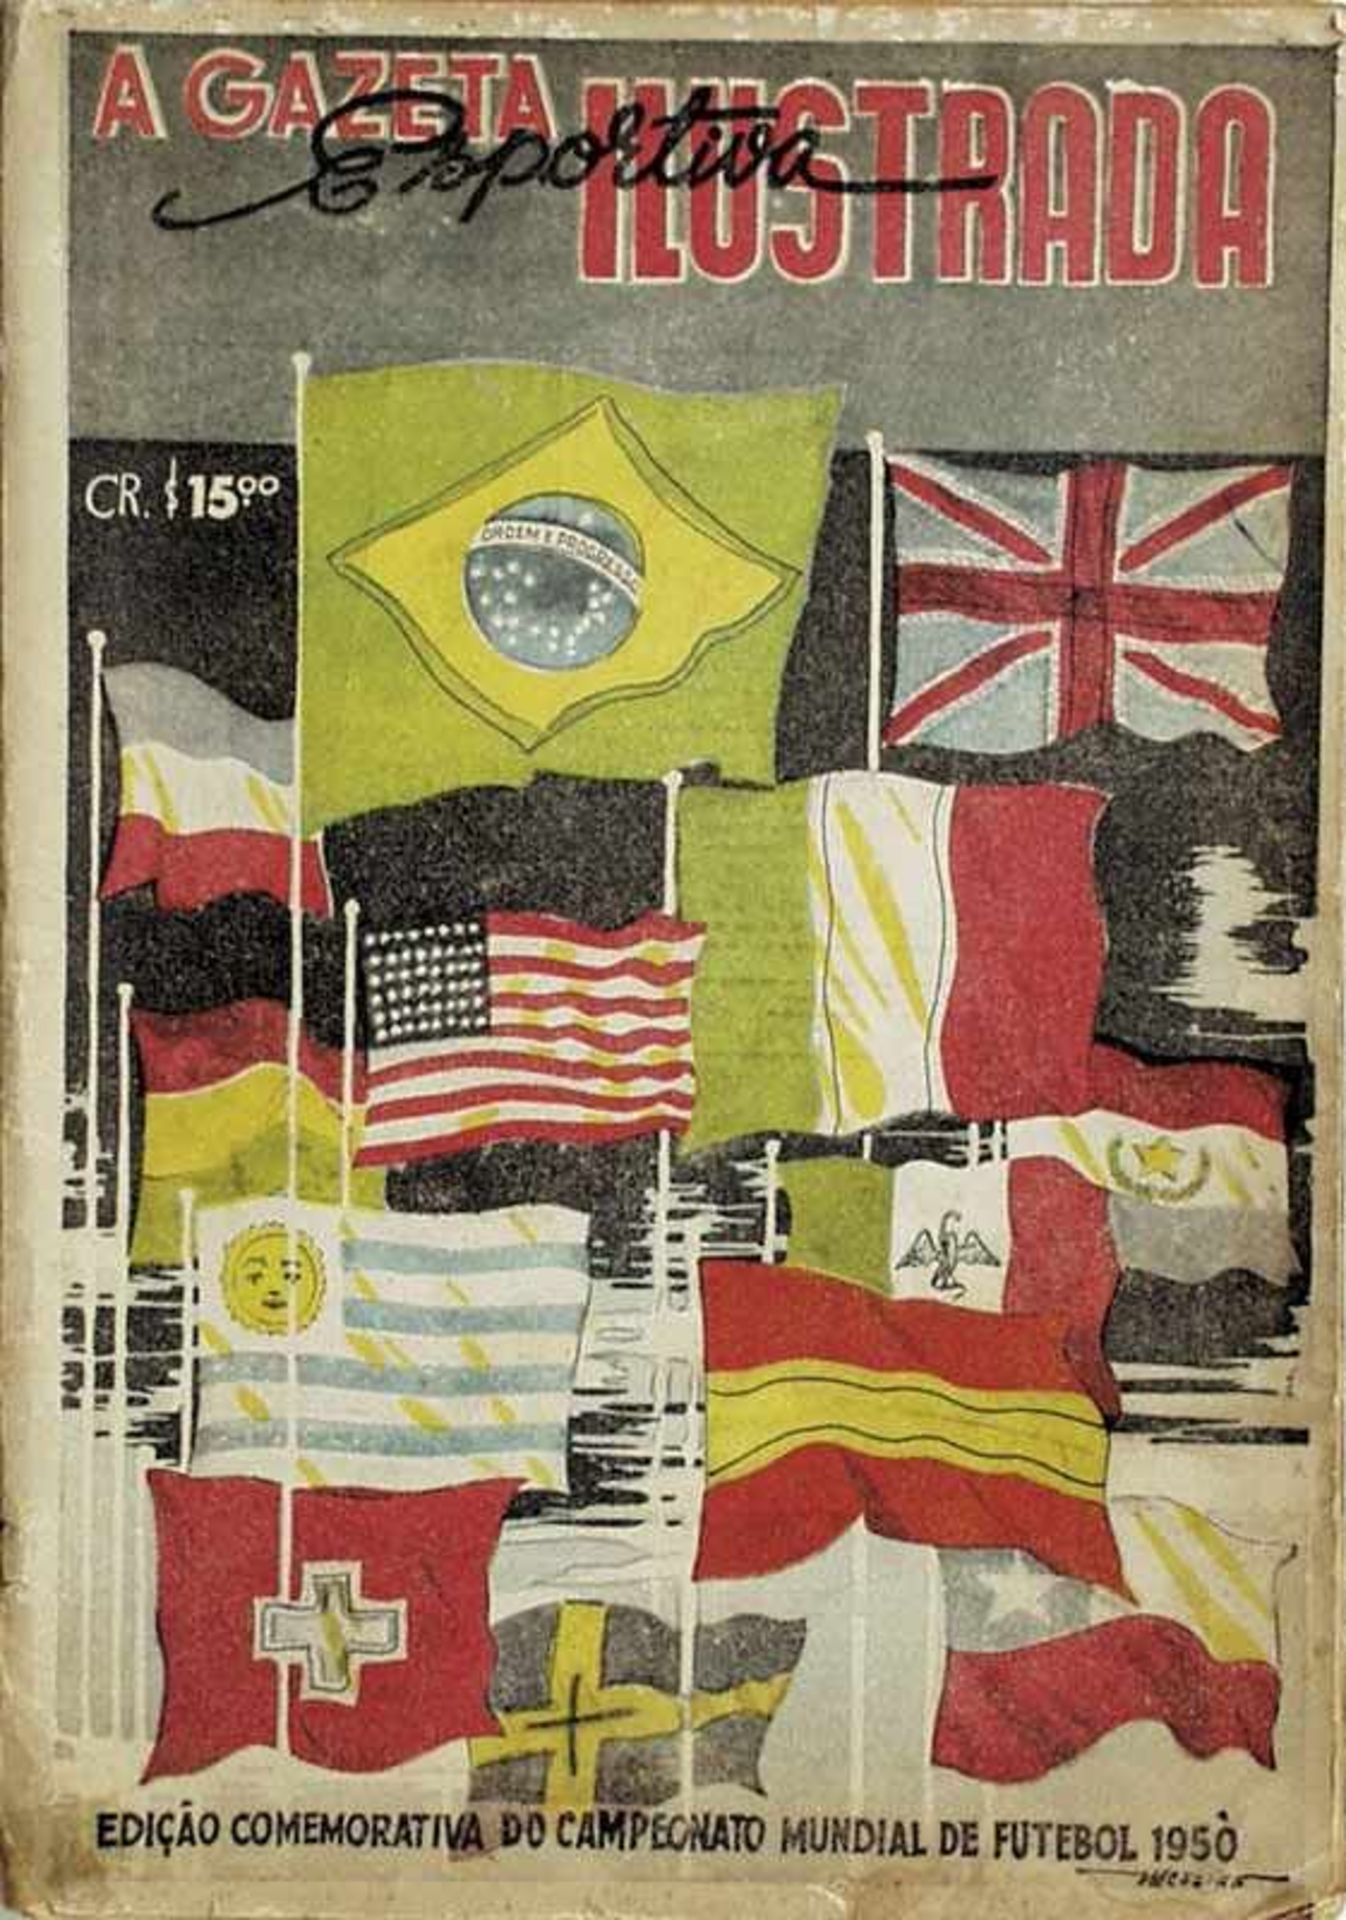 World Cup 1950 Brasilian Report - Portuguese language magazine about the football World Cup 1950